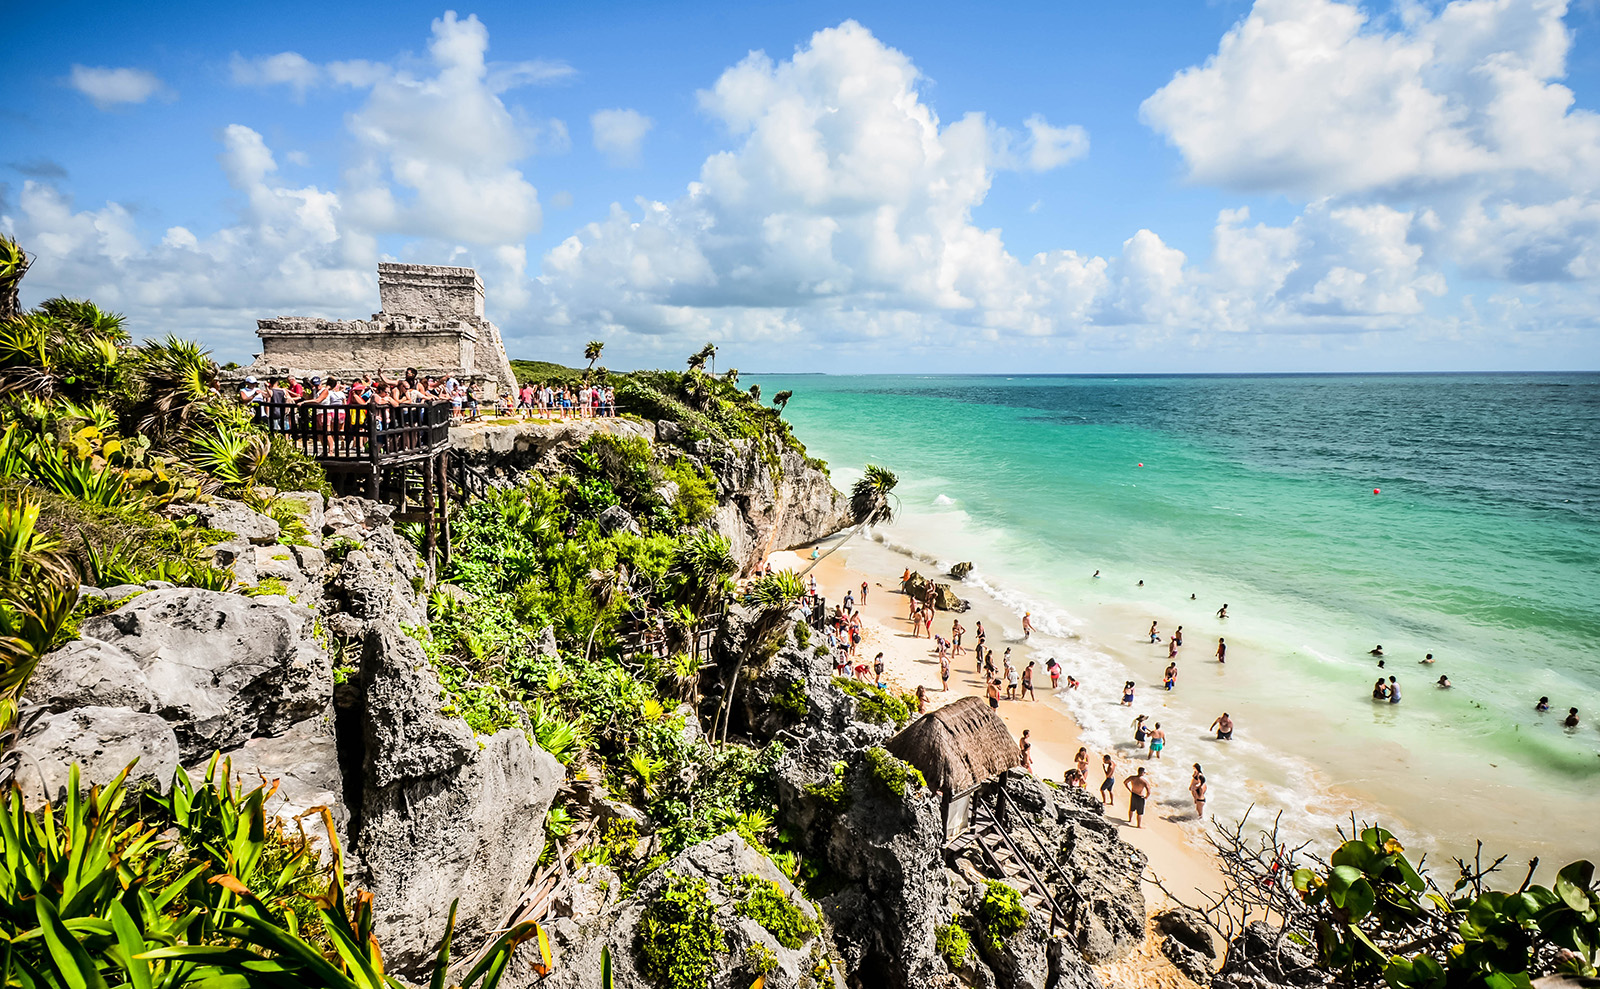 mayan ruins on a cliff above a beach in tulum, mexico